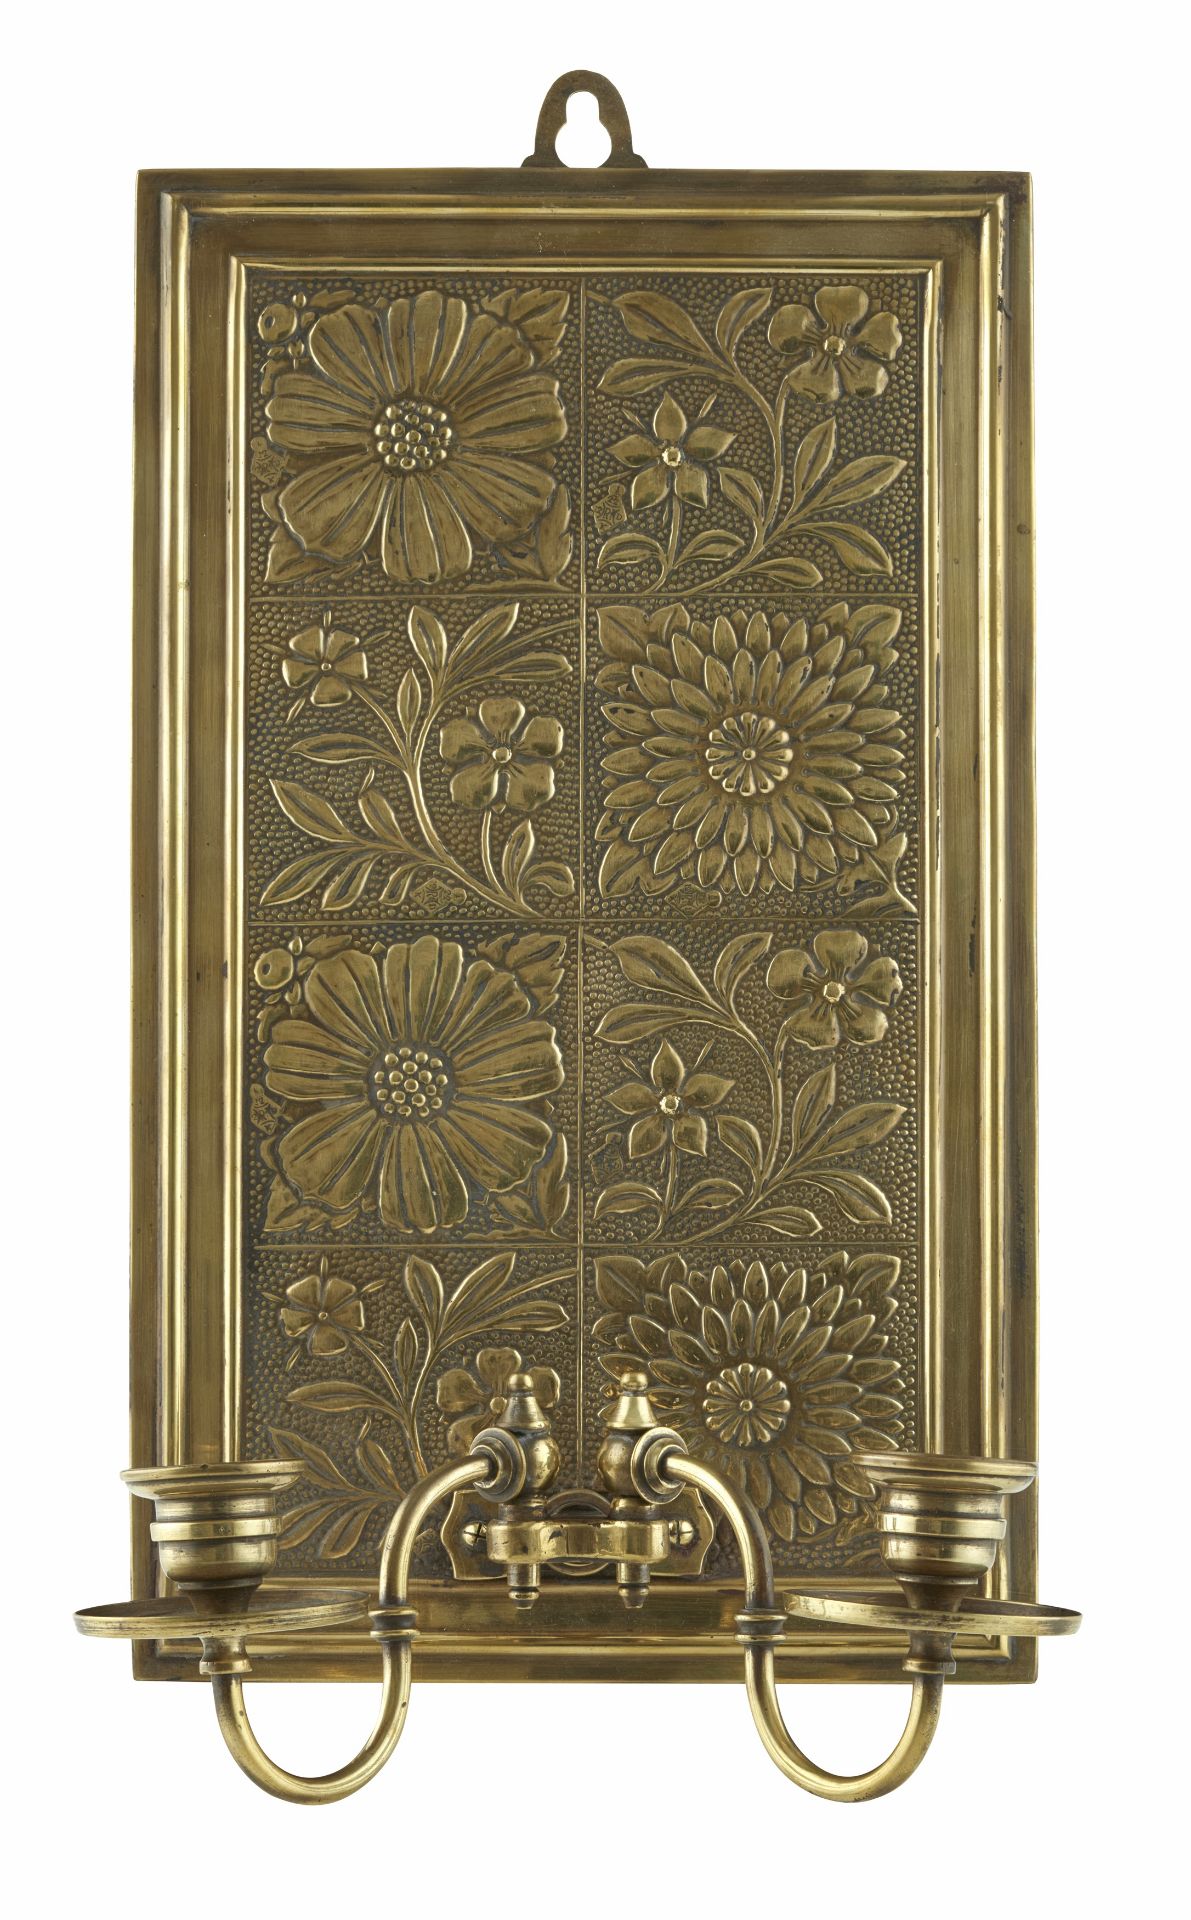 MANNER OF BRUCE J. TALBERT PAIR OF AESTHETIC MOVEMENT WALL SCONCES, DATED 1878 - Image 2 of 3